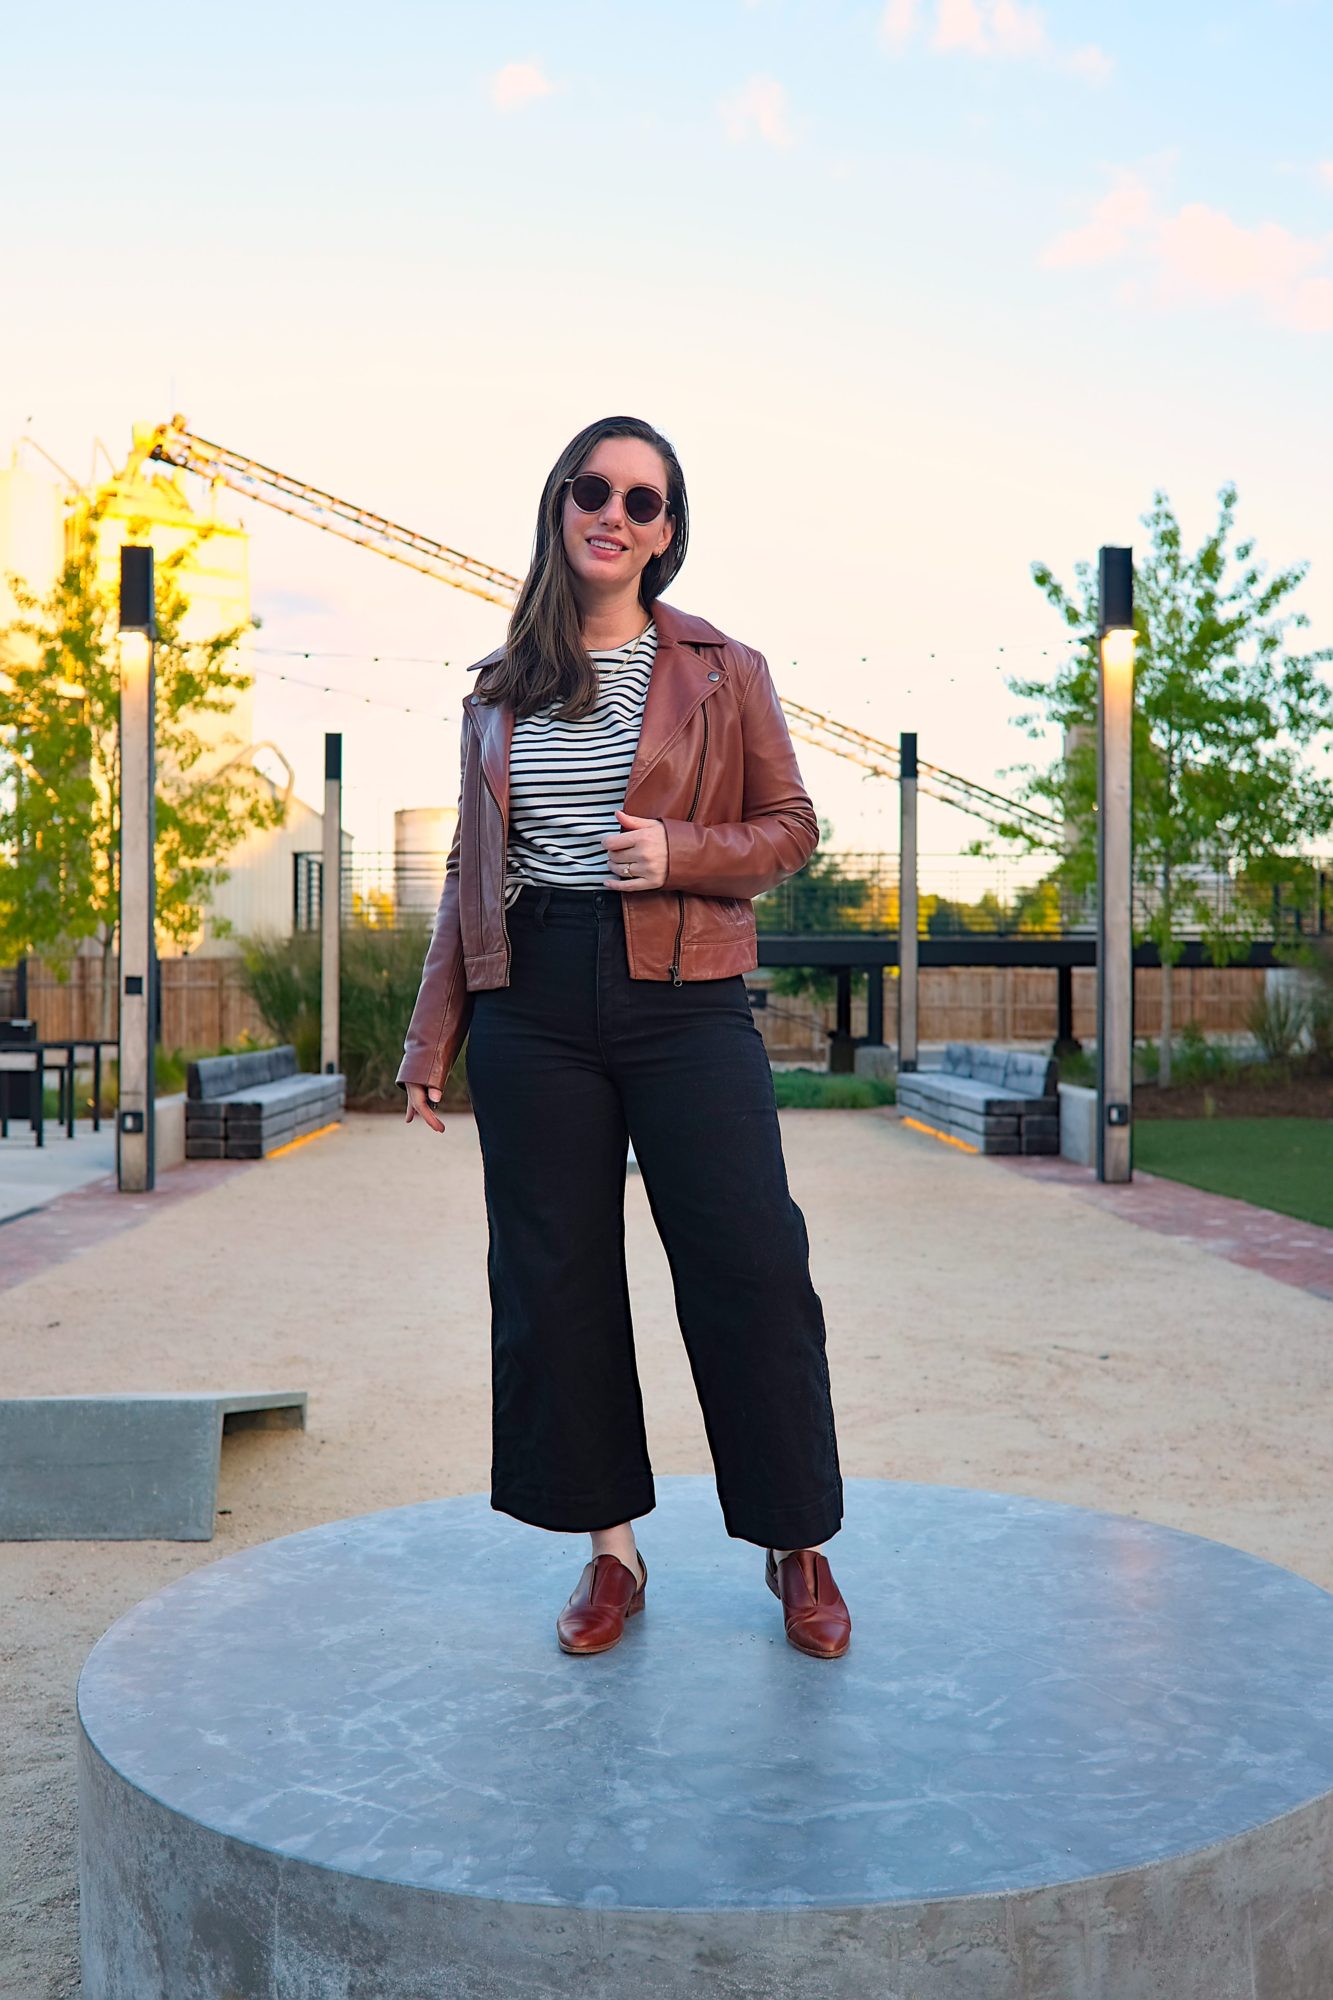 Alyssa wears the ABLE Maha Leather Jacket in an industrial area